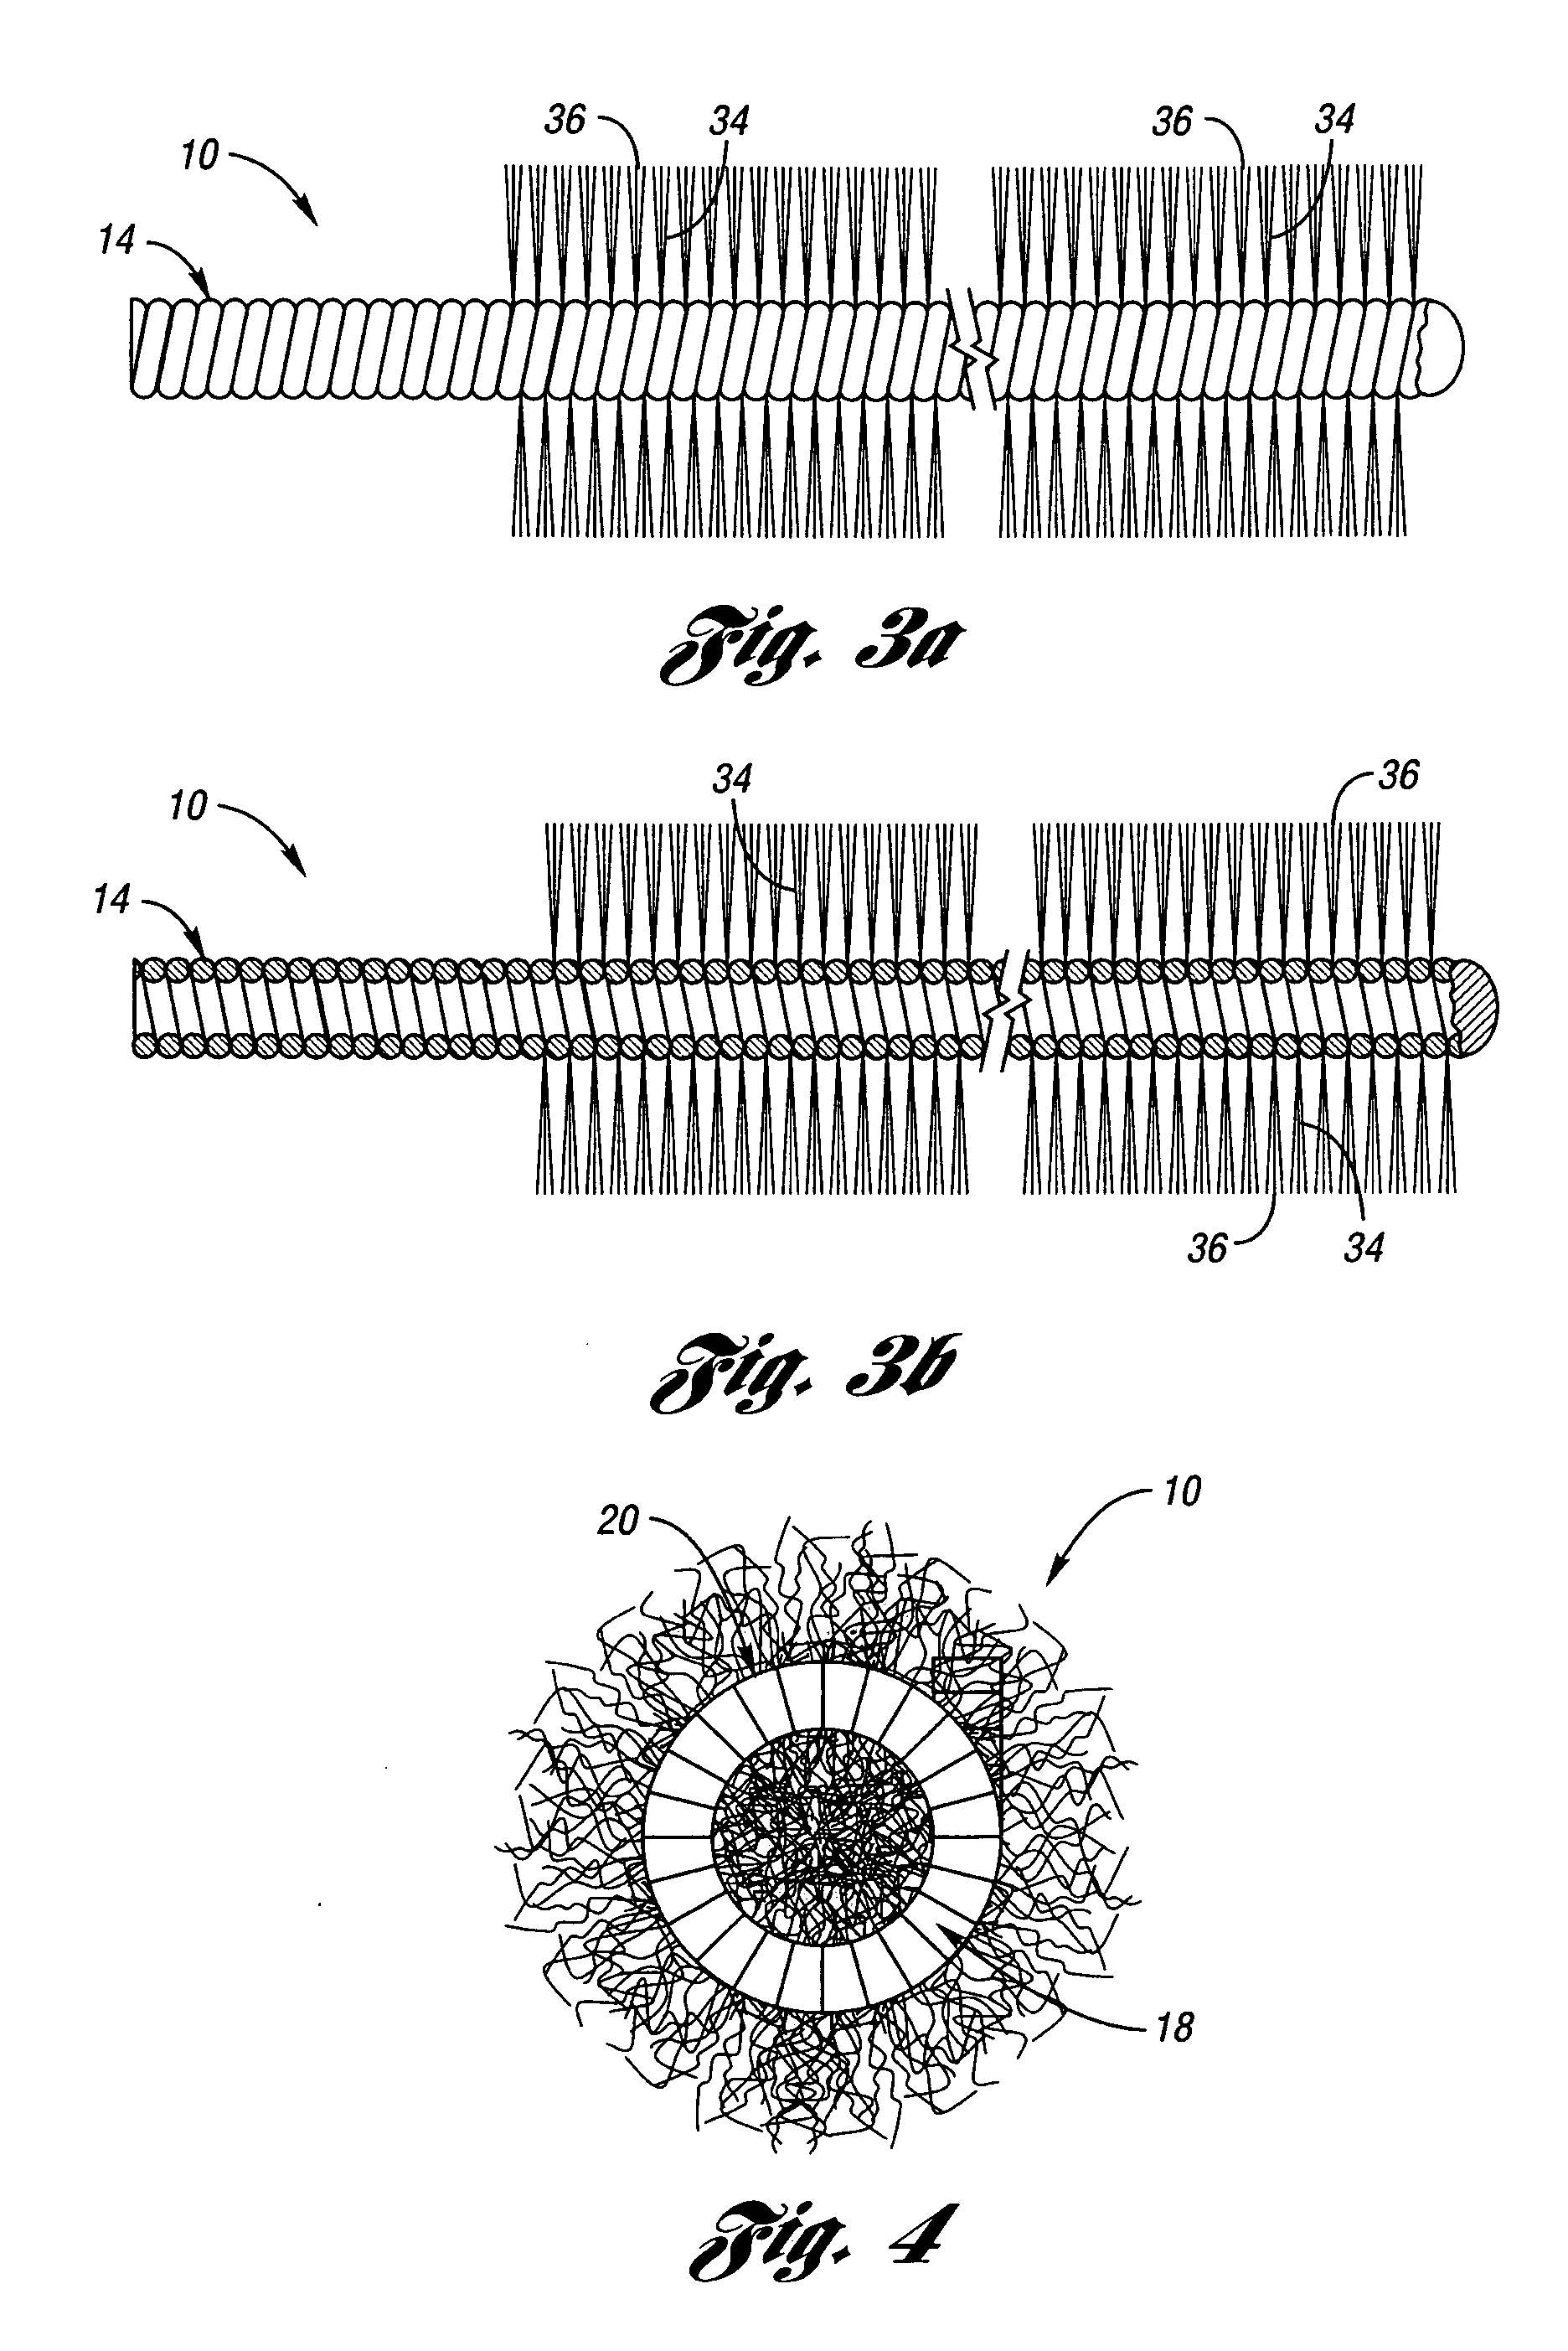 Variable stiffness occluding device